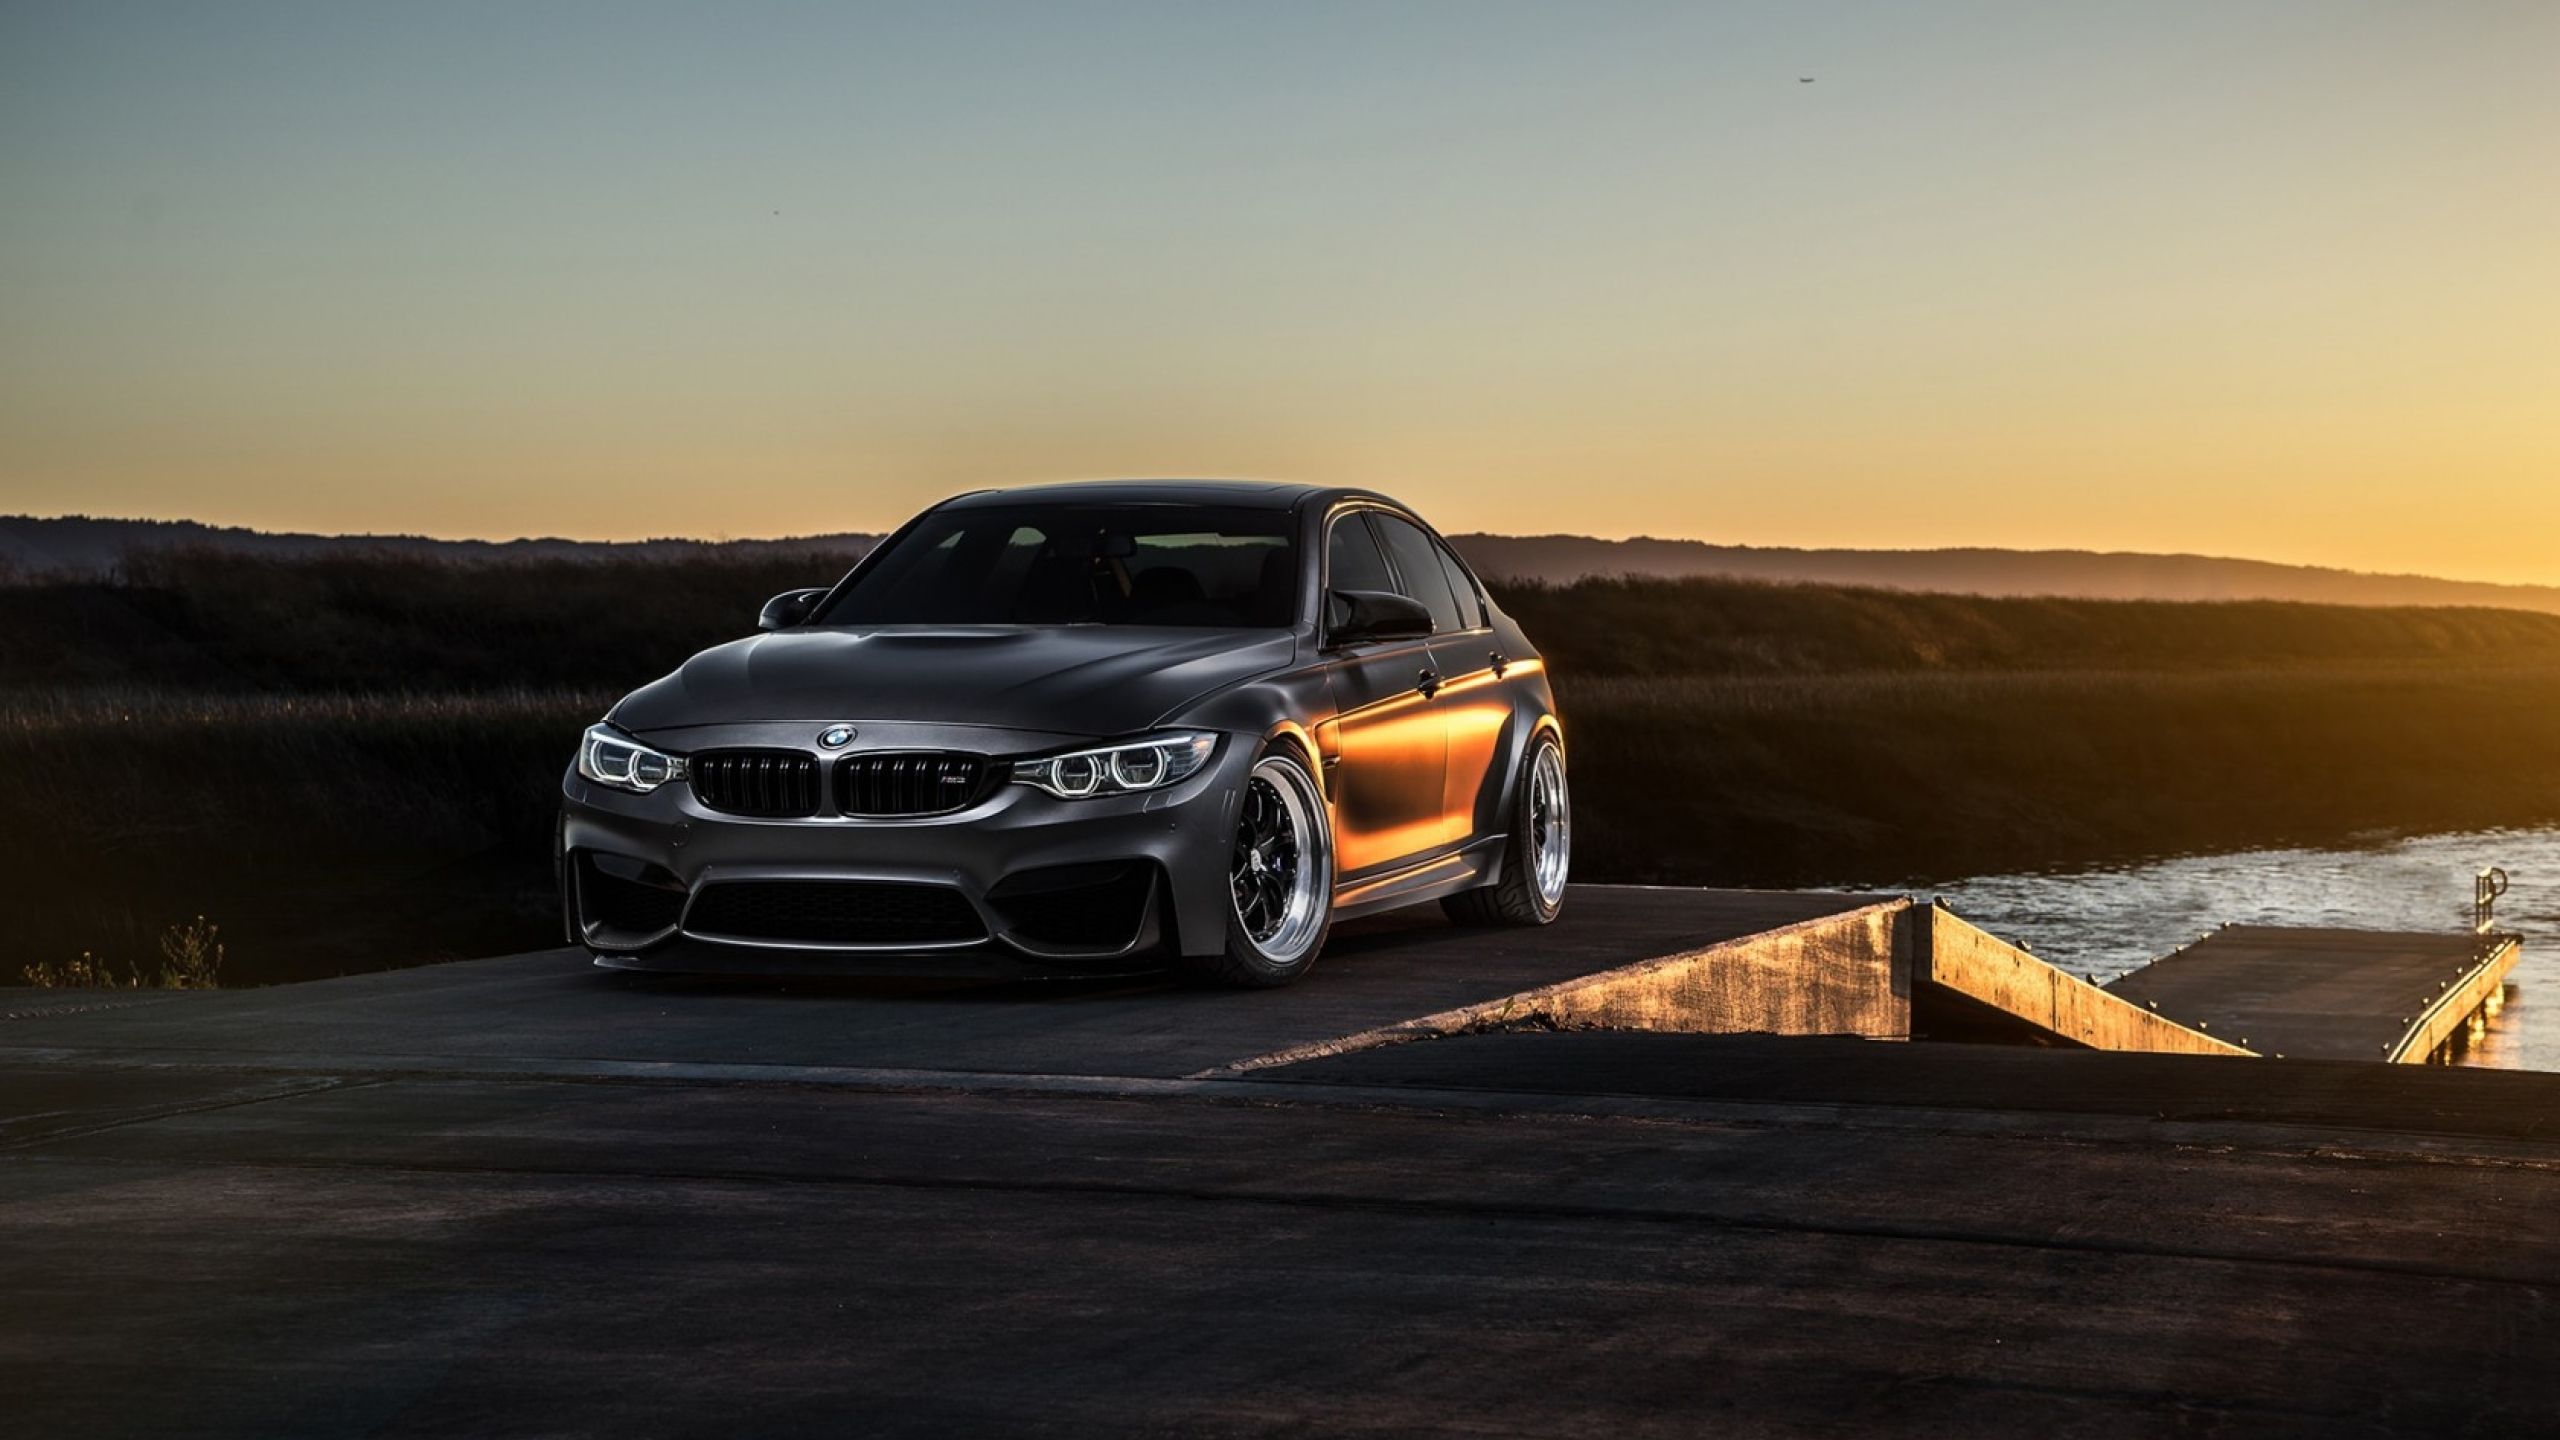 bmw, f m3 1440P Resolution Wallpaper, HD Cars 4K Wallpaper, Image, Photo and Background